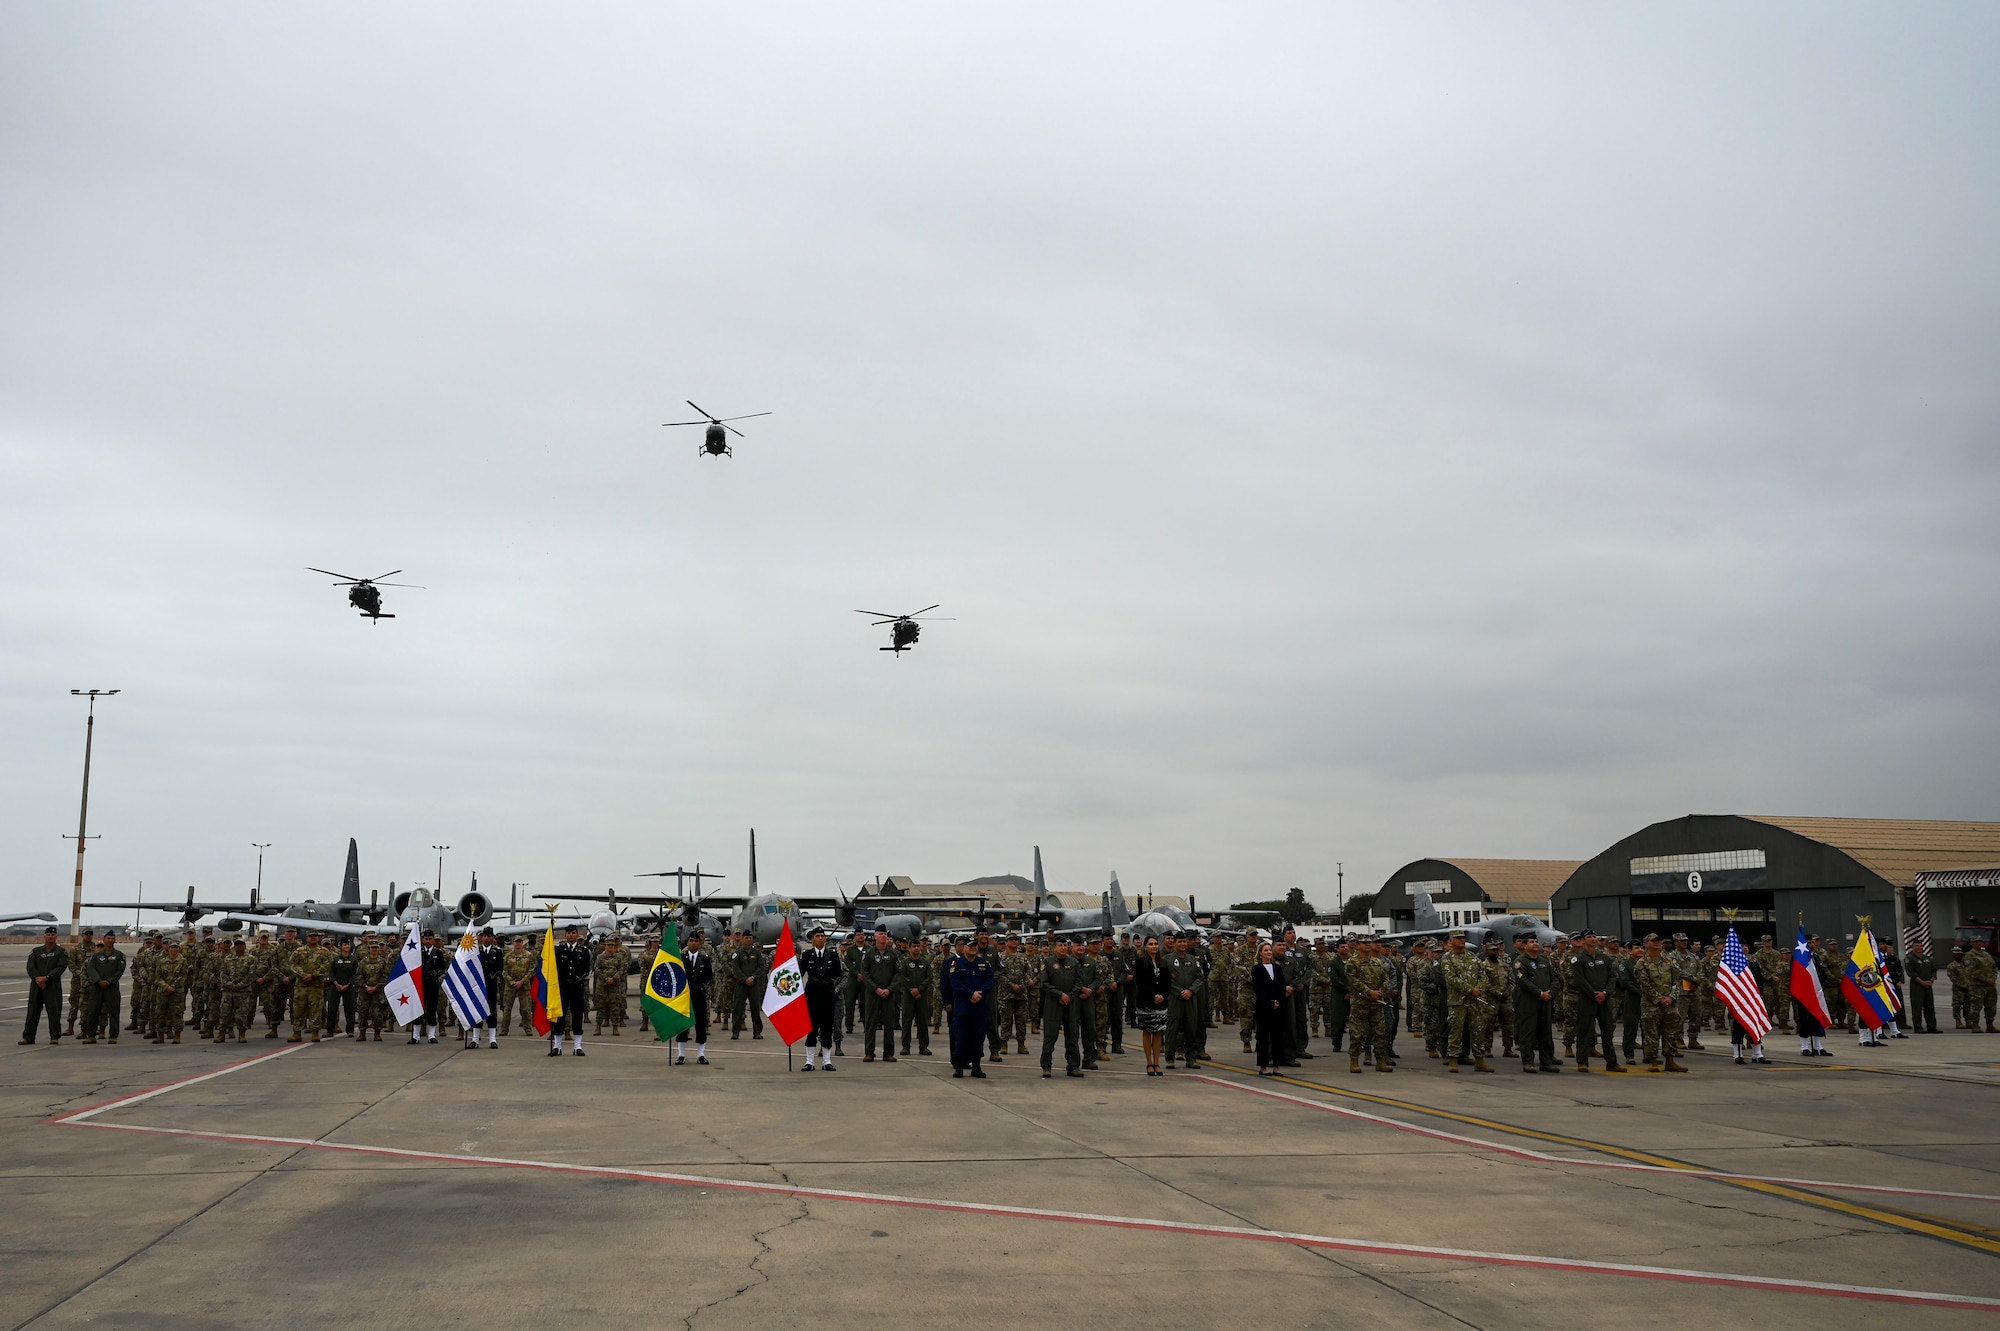 A combined formation of Peruvian and U.S. Air Force Airmen stand on the flight line at Lima in front of aircraft representing both countries.